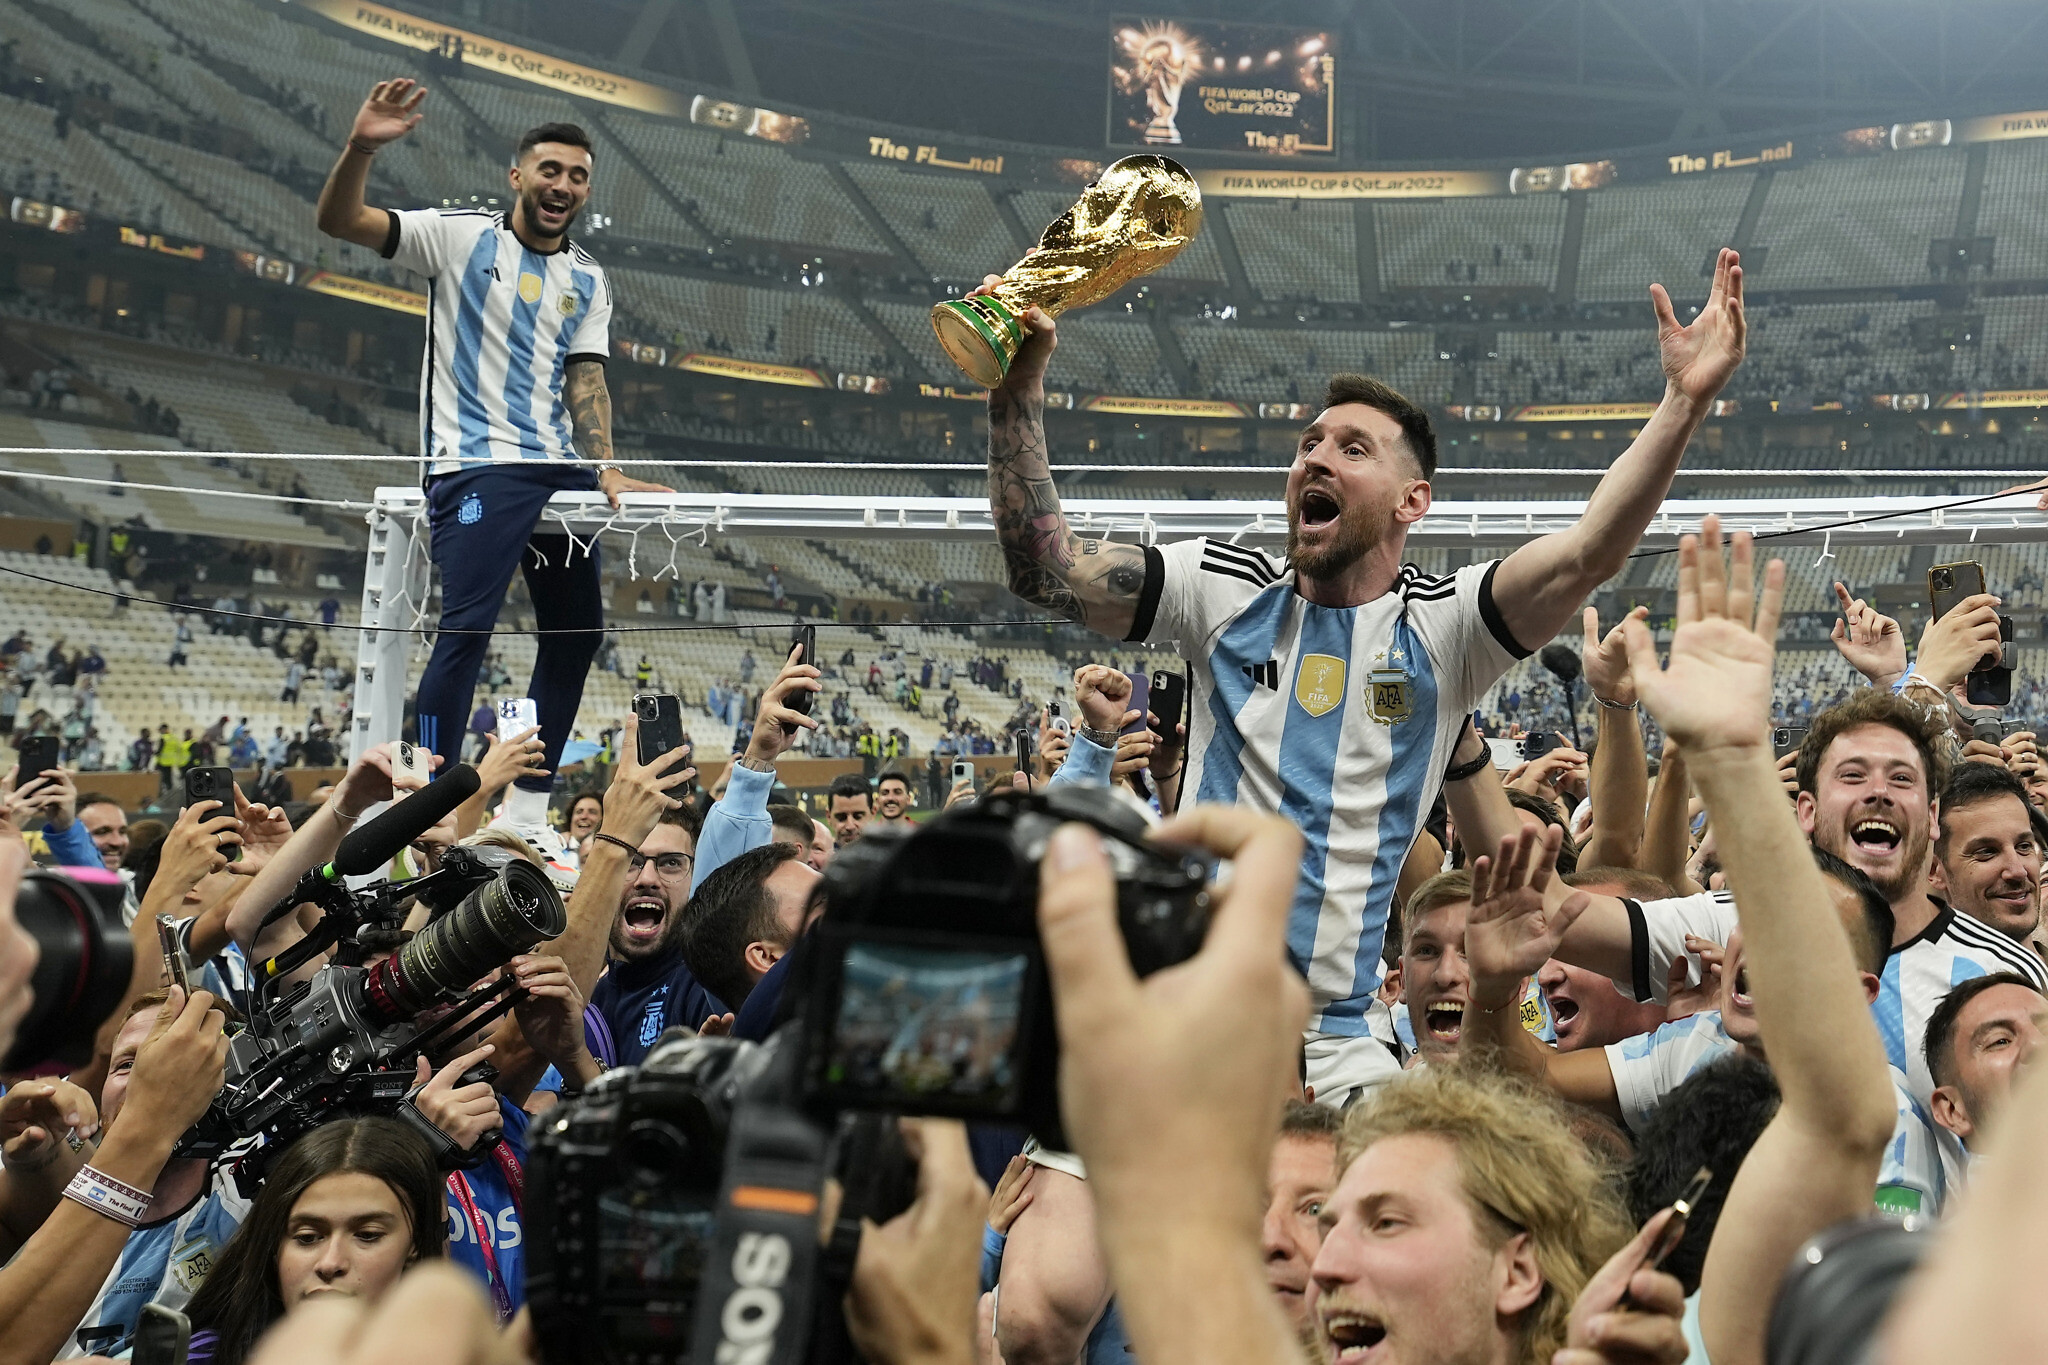 Messi explains controversial World Cup celebration